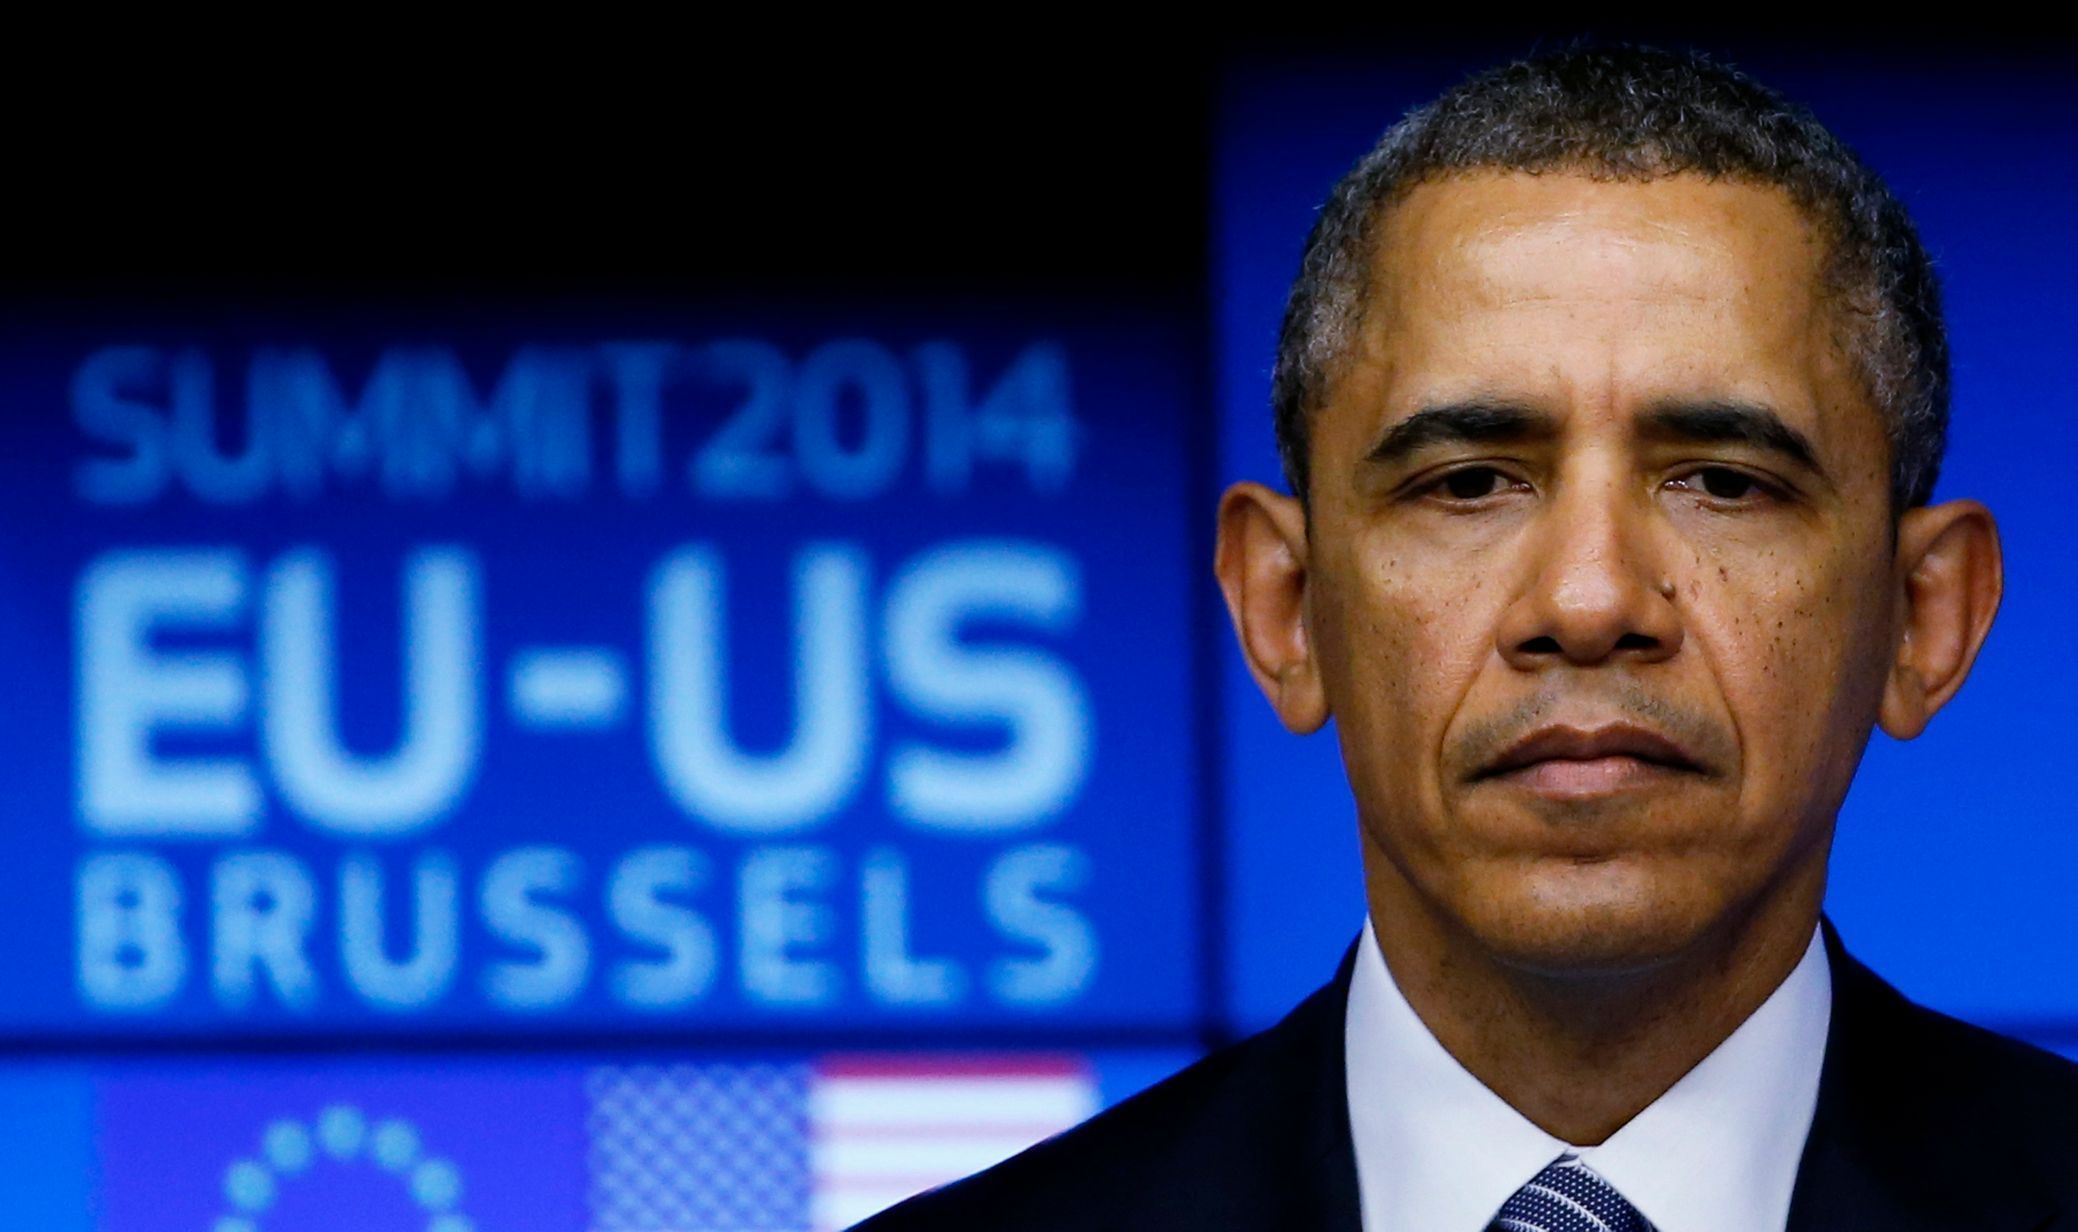 U.S. President Barack Obama looks on as he takes part in a EU-US summit in Brussels